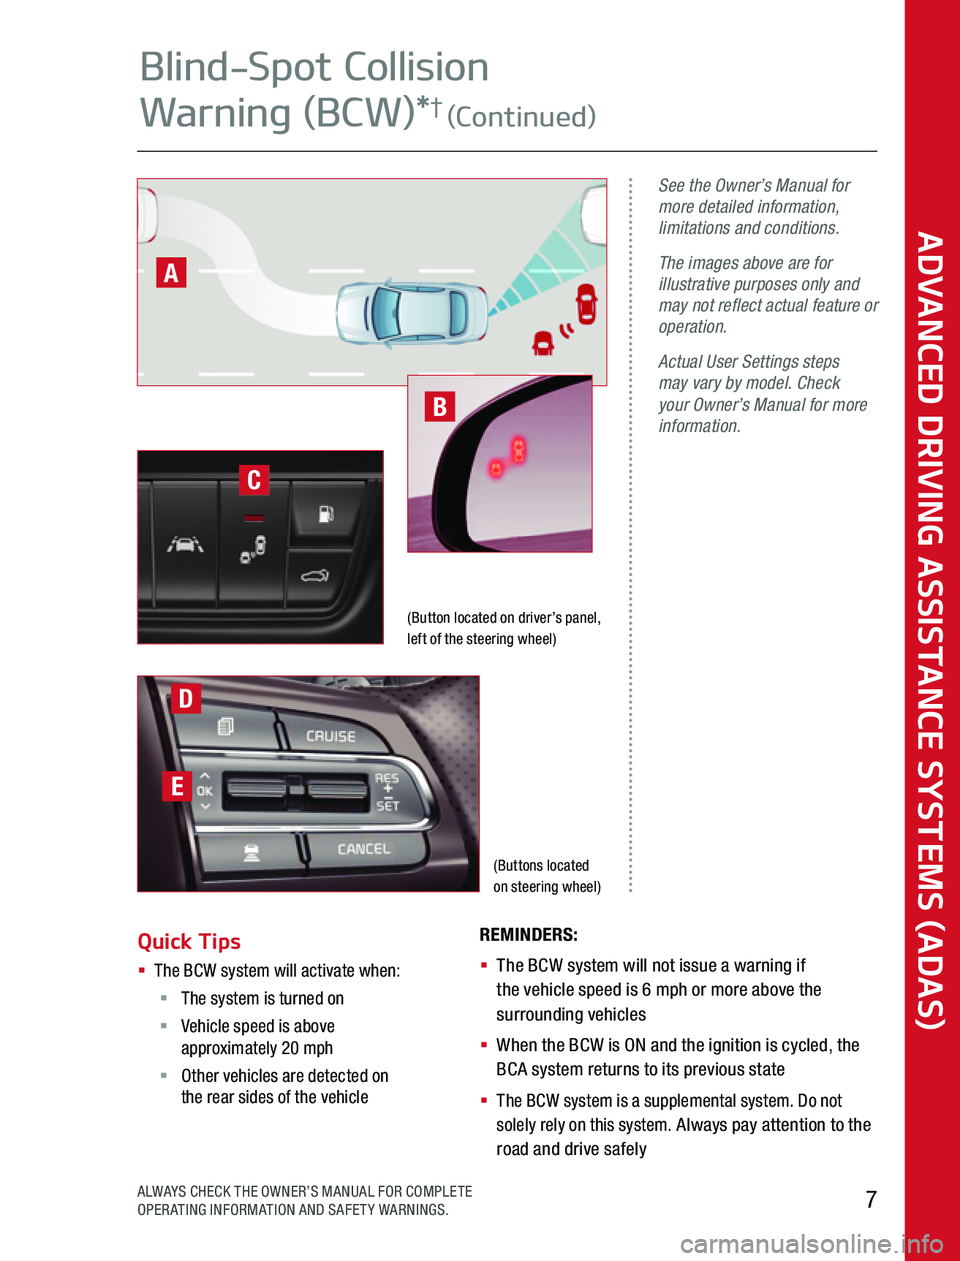 KIA TELLURIDE 2020  Advanced Driving Assistance System (Buttons located  on steering wheel)
See the Owner’s Manual for more detailed information, limitations and conditions.
The images above are for illustrative purposes only and may not reflect actual 